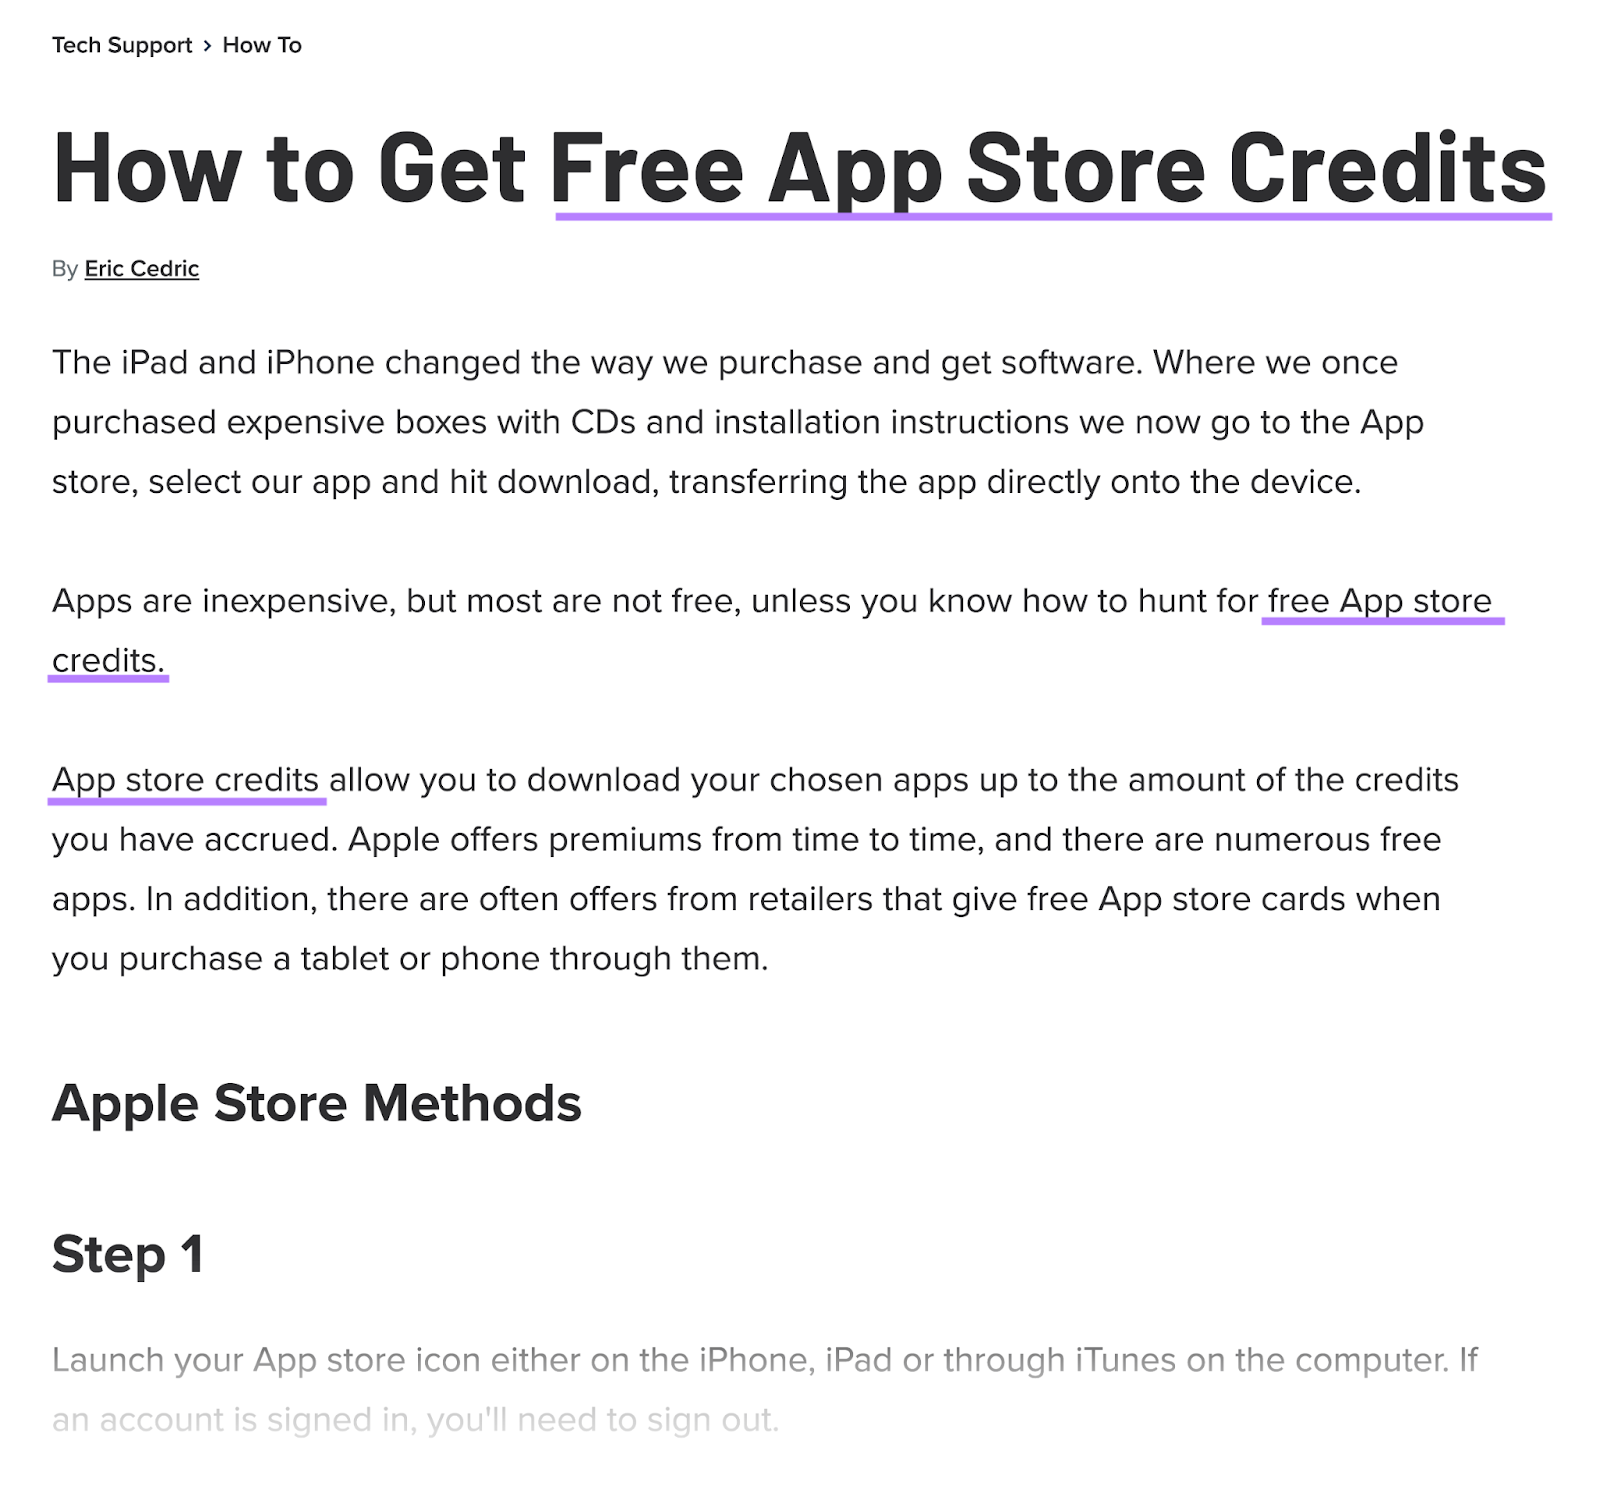 article on how to get free app store credits